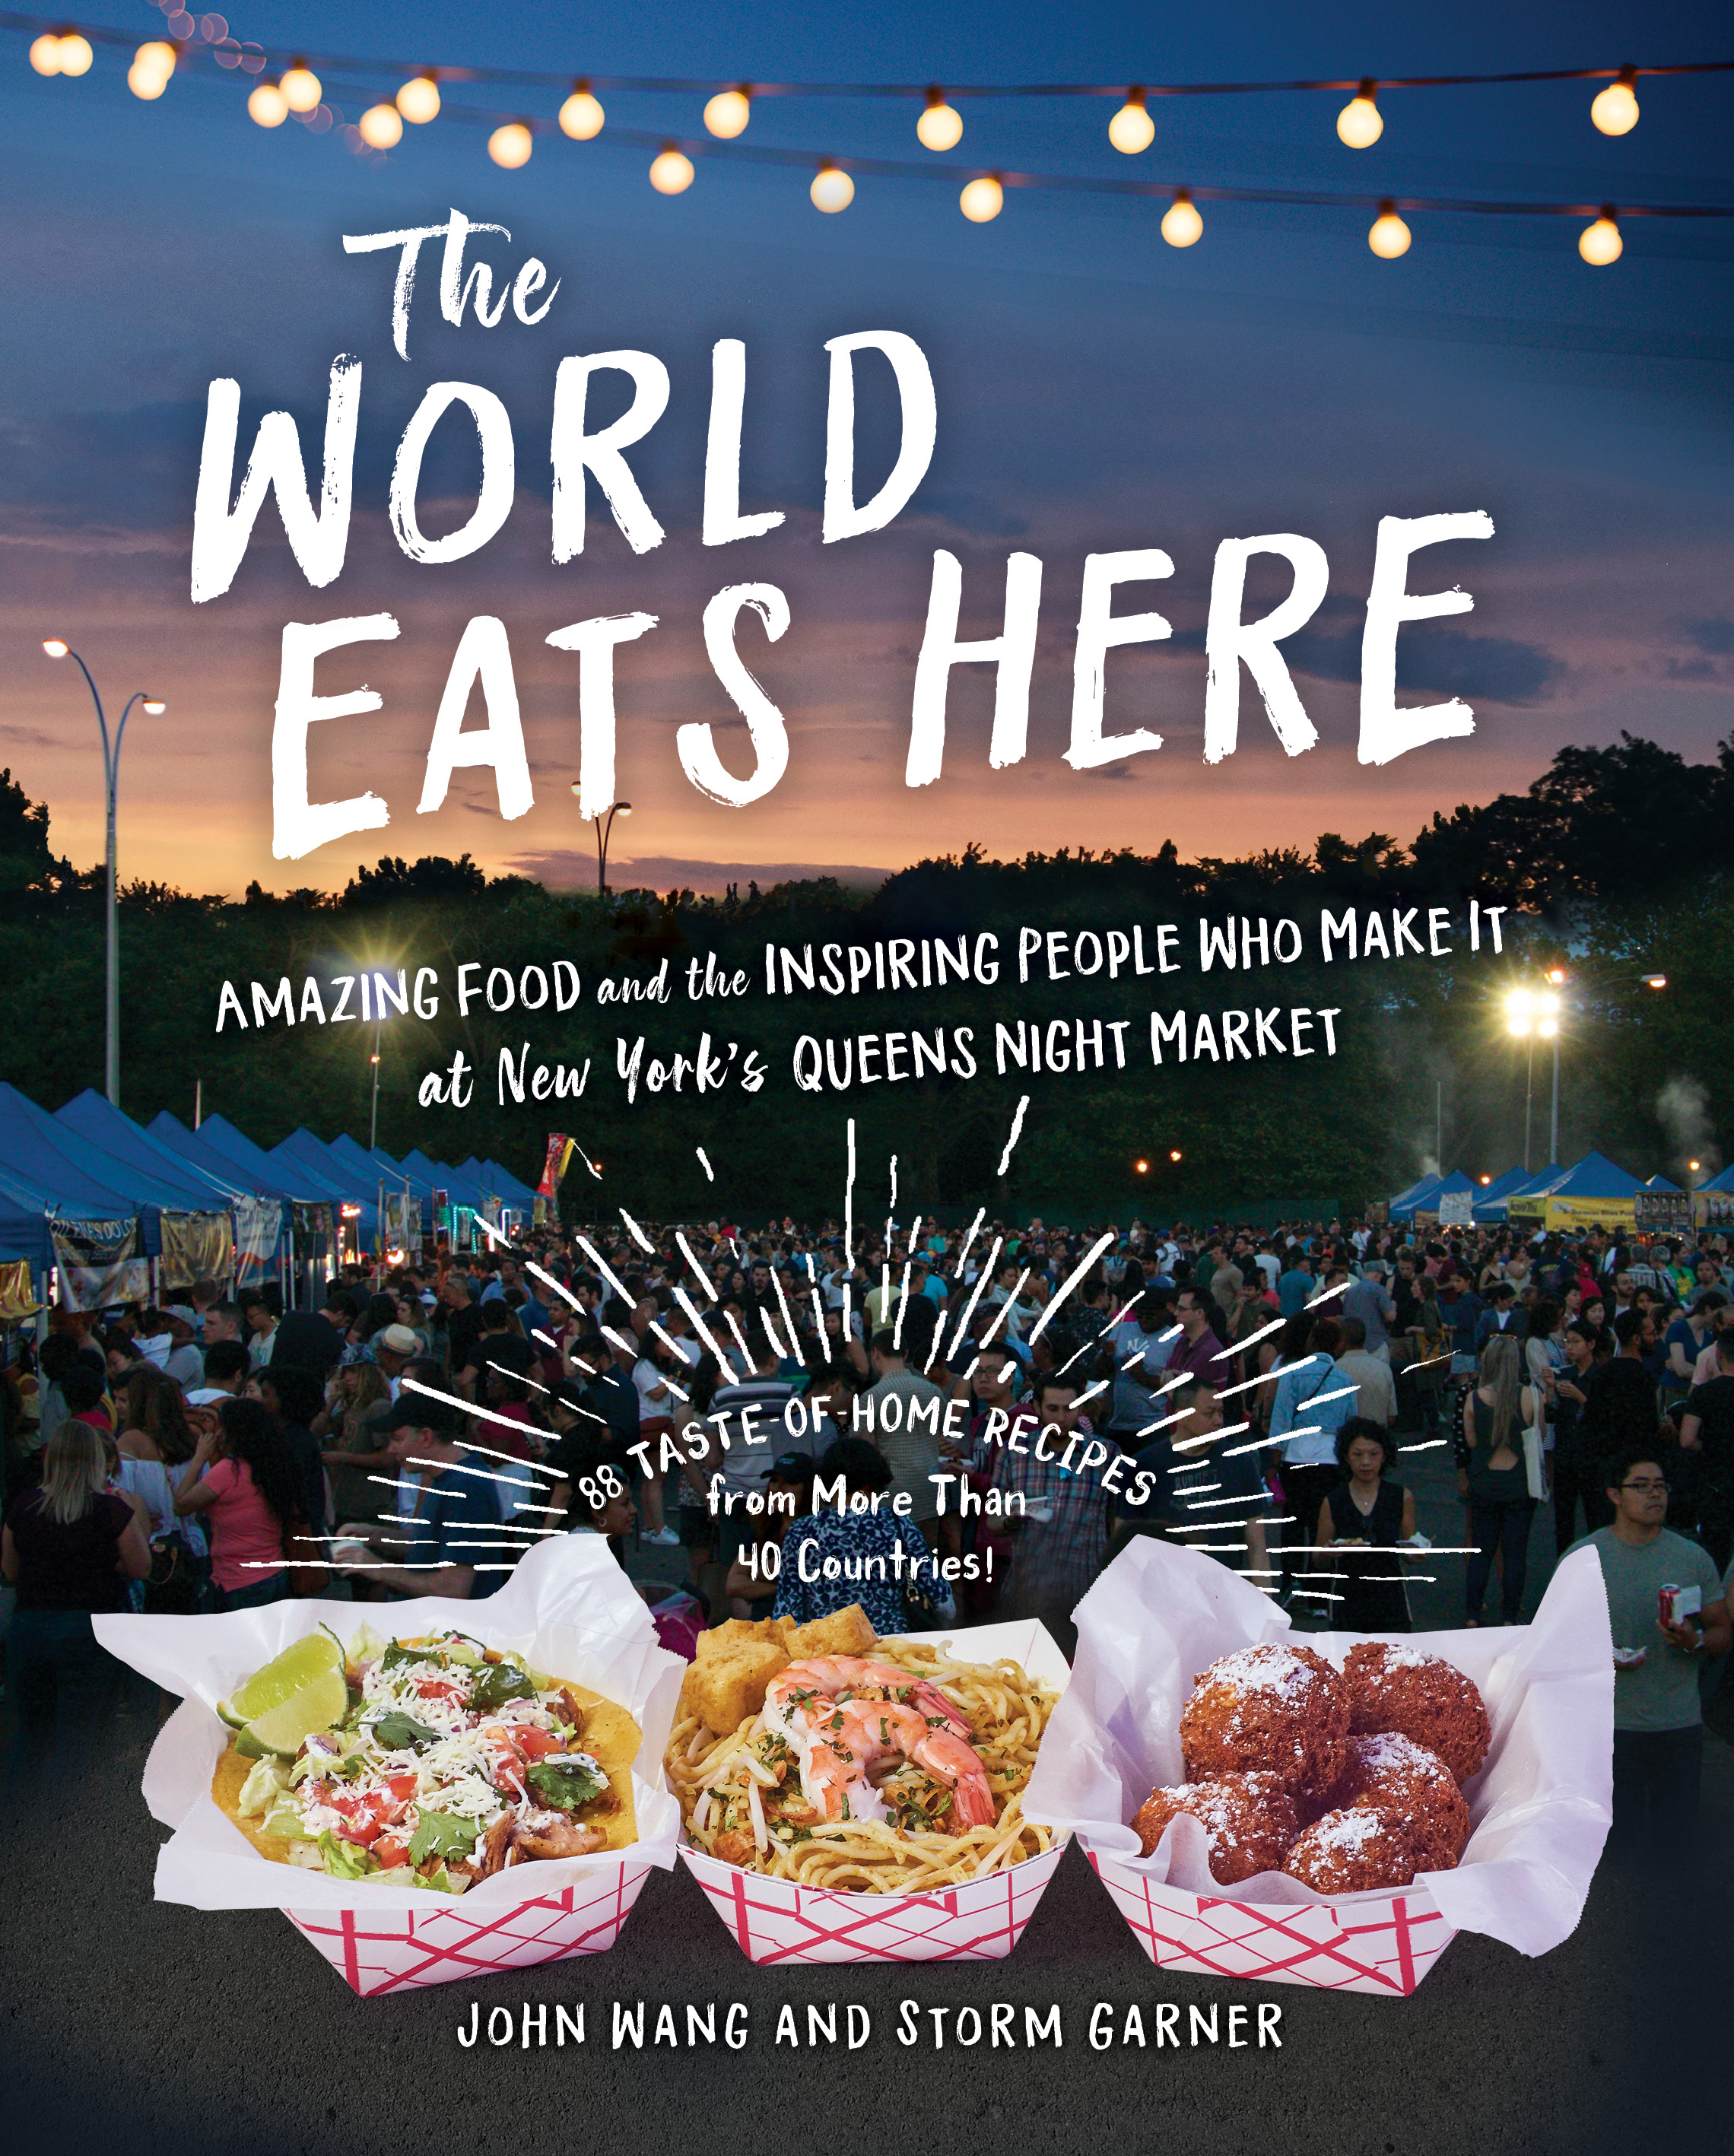 The World Eats Here Amazing Food and the Inspiring People Who Make It at New York's Queens Night Market cover image